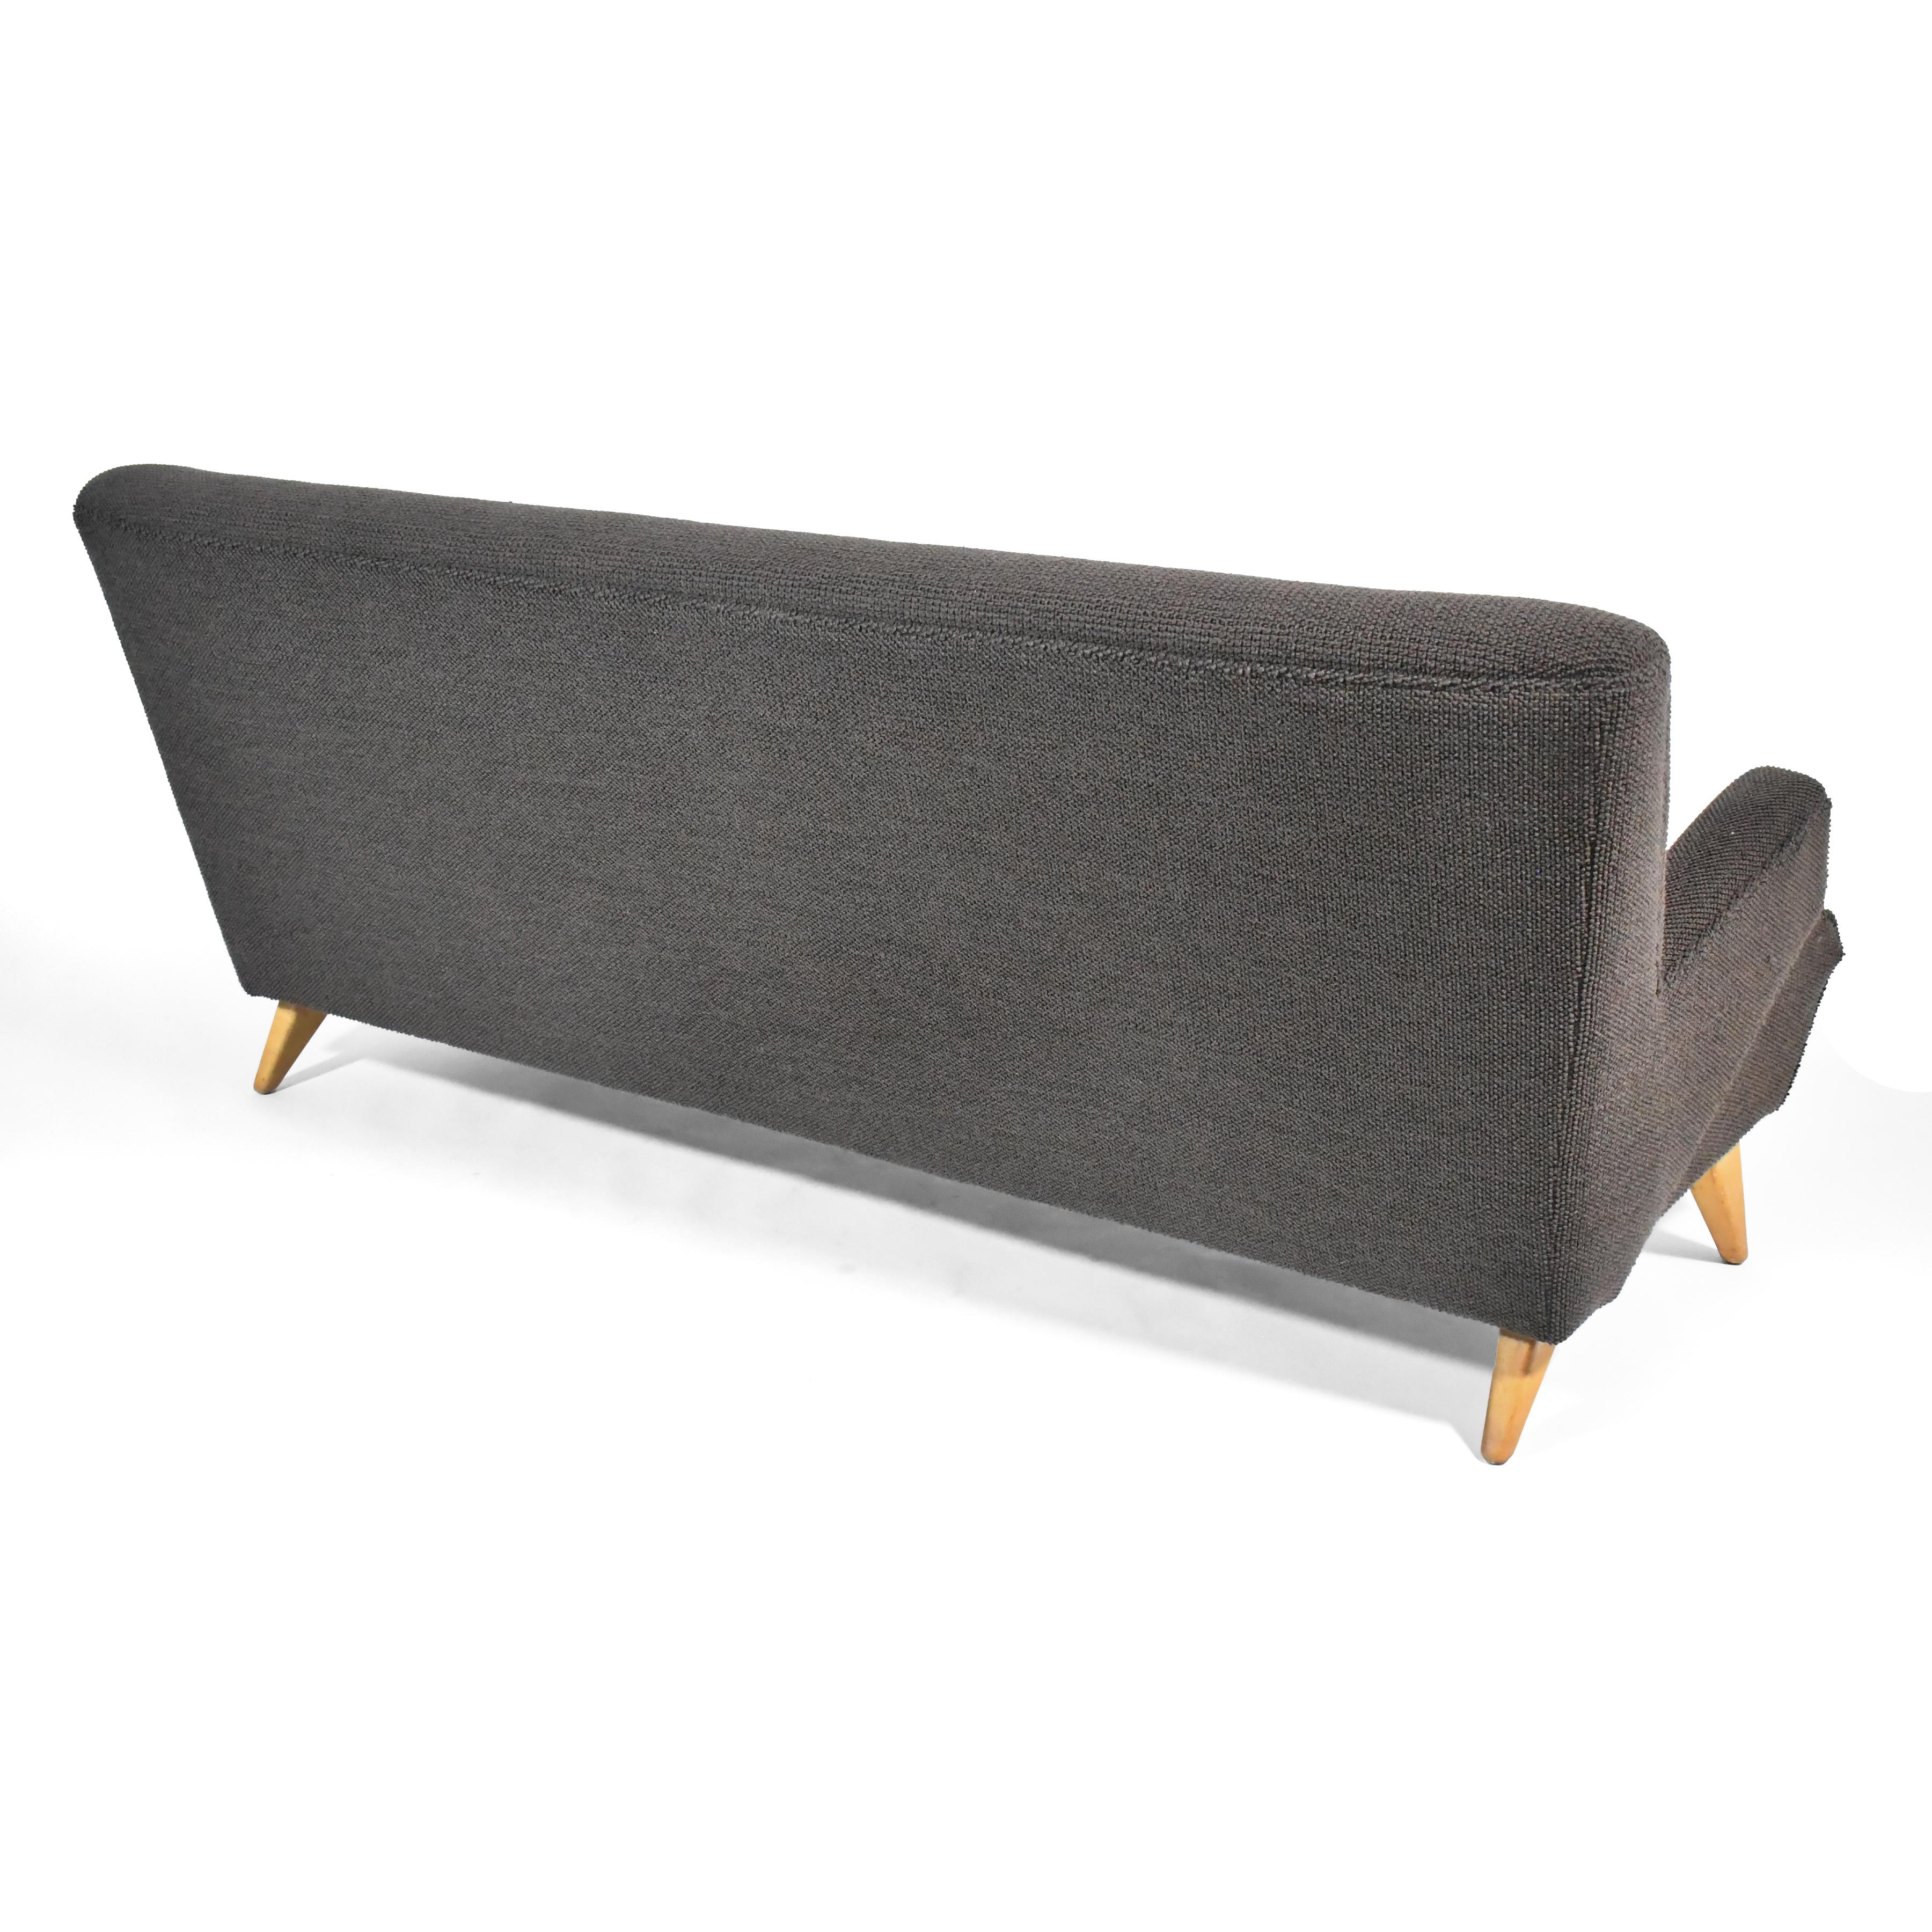 Mid-20th Century Jens Risom Sofa by Knoll For Sale